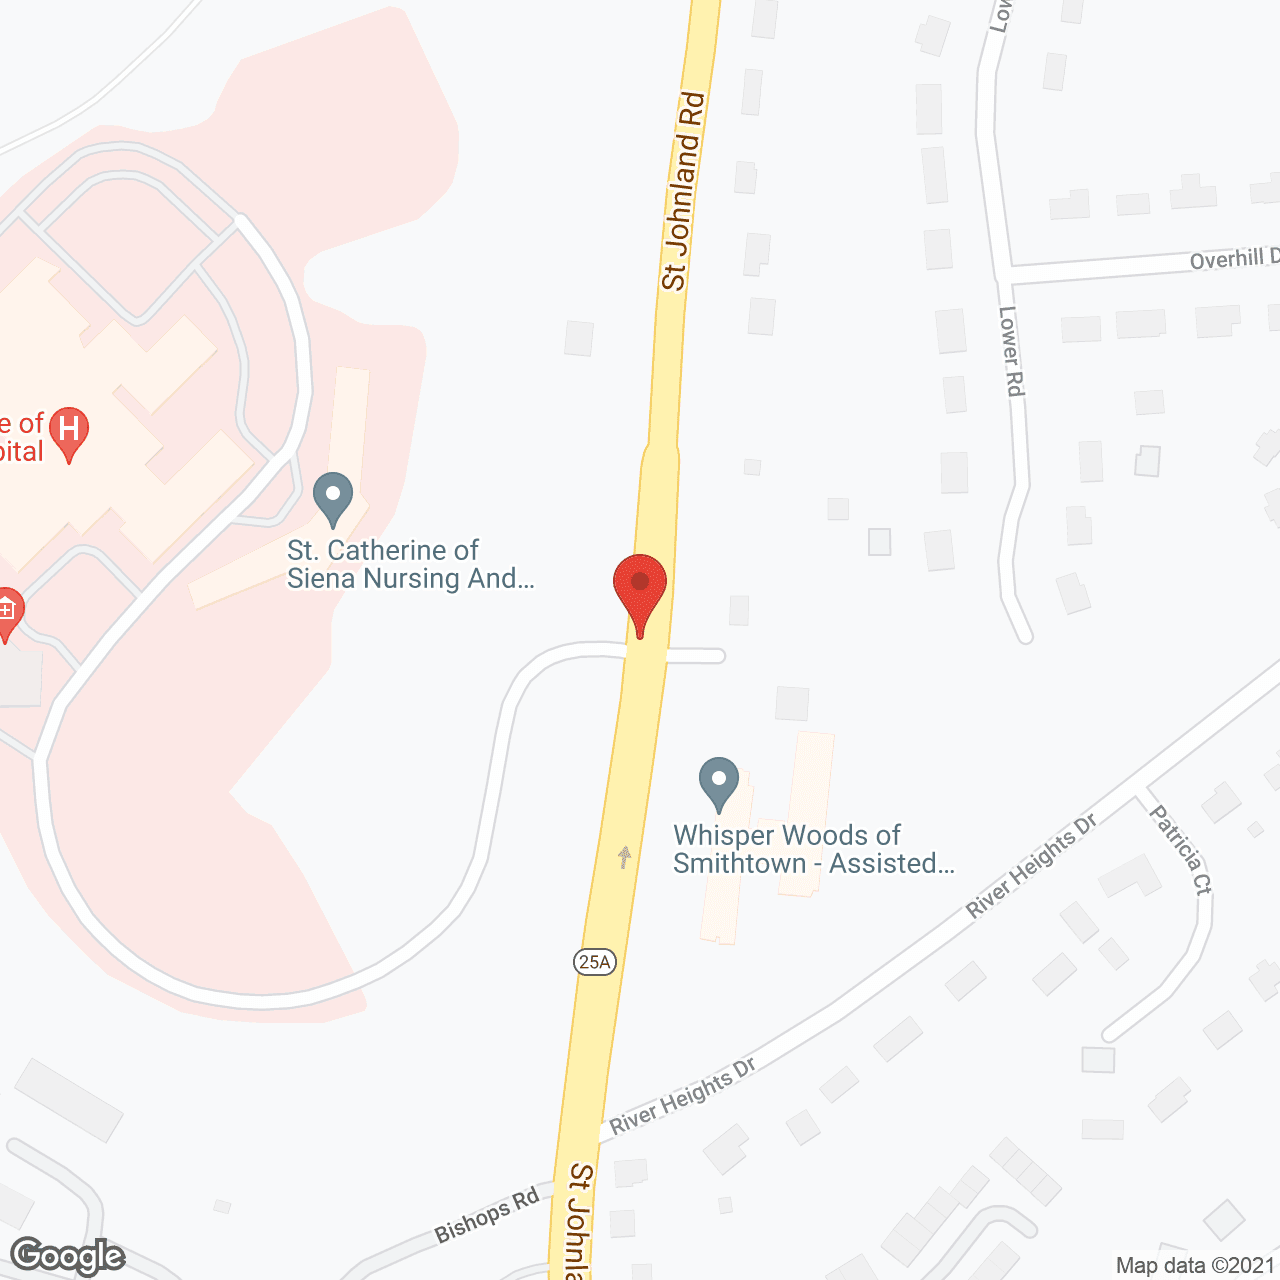 St. Catherine of Siena Nursing and Rehab in google map